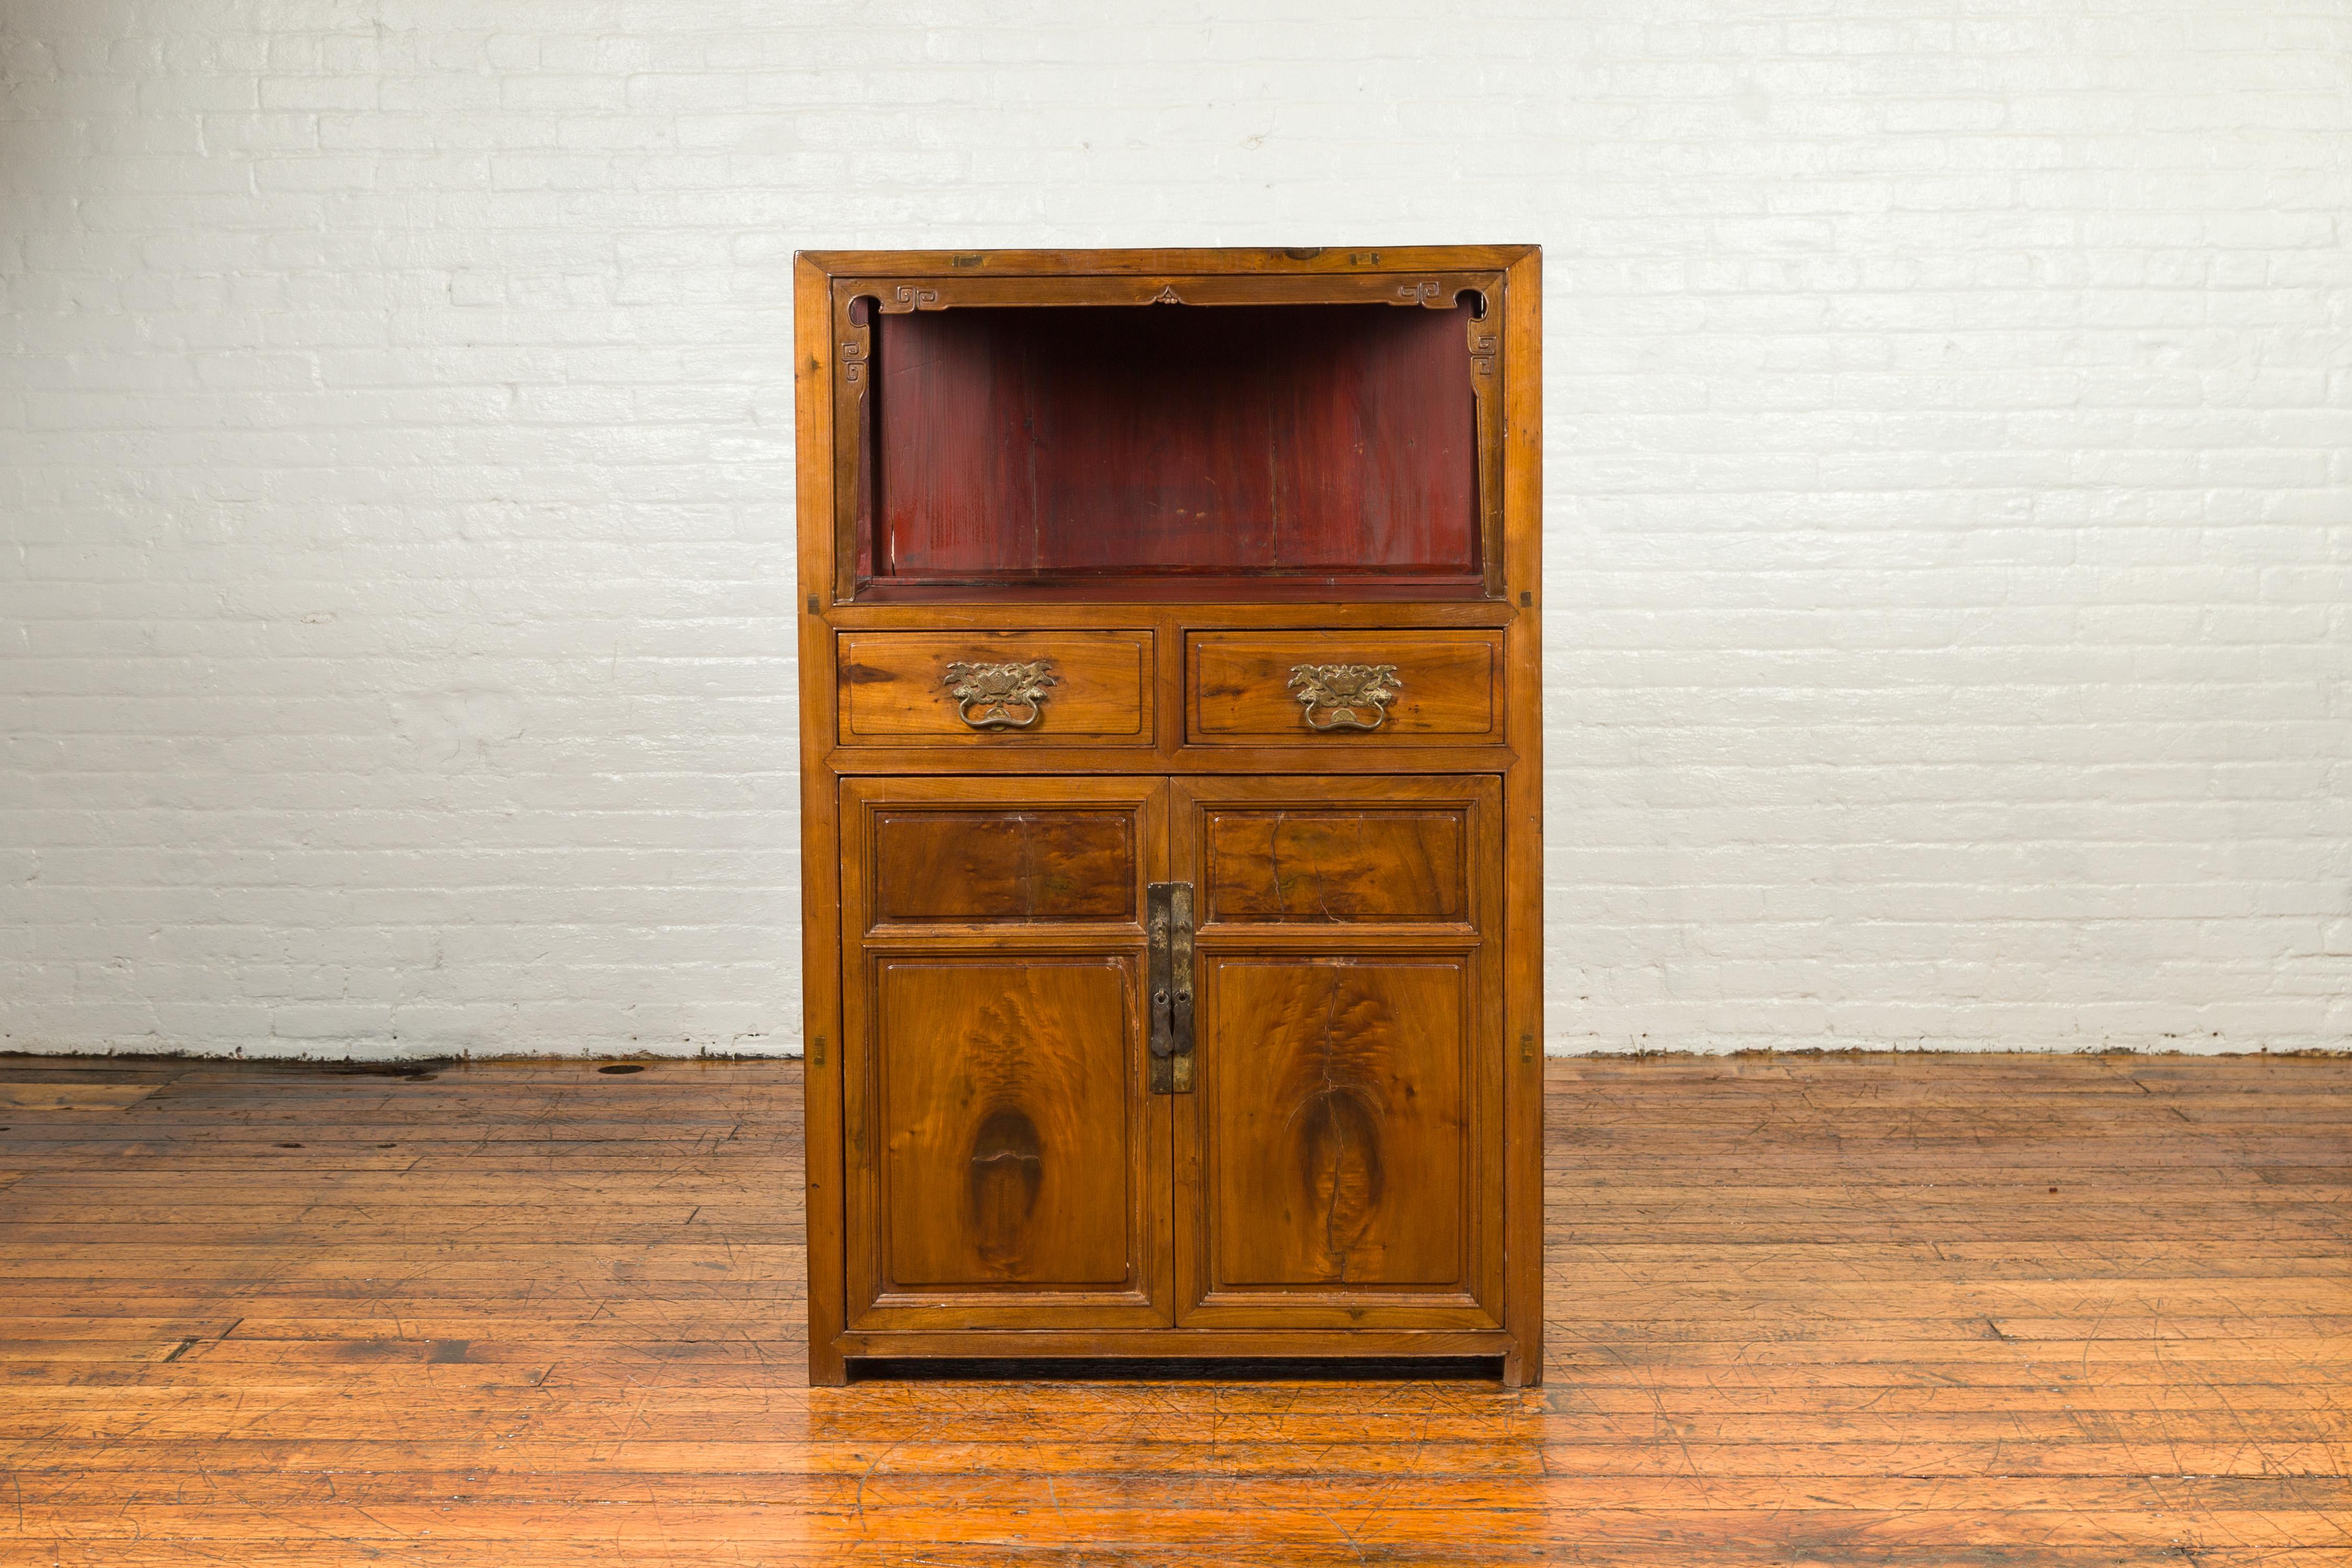 An antique Chinese Qing Dynasty period wooden bookcase from the 19th century, with open shelf, carved scrolls and two drawers over two doors. Crafted in China during the Qing Dynasty period, this bookcase features an open-shelved top with carved